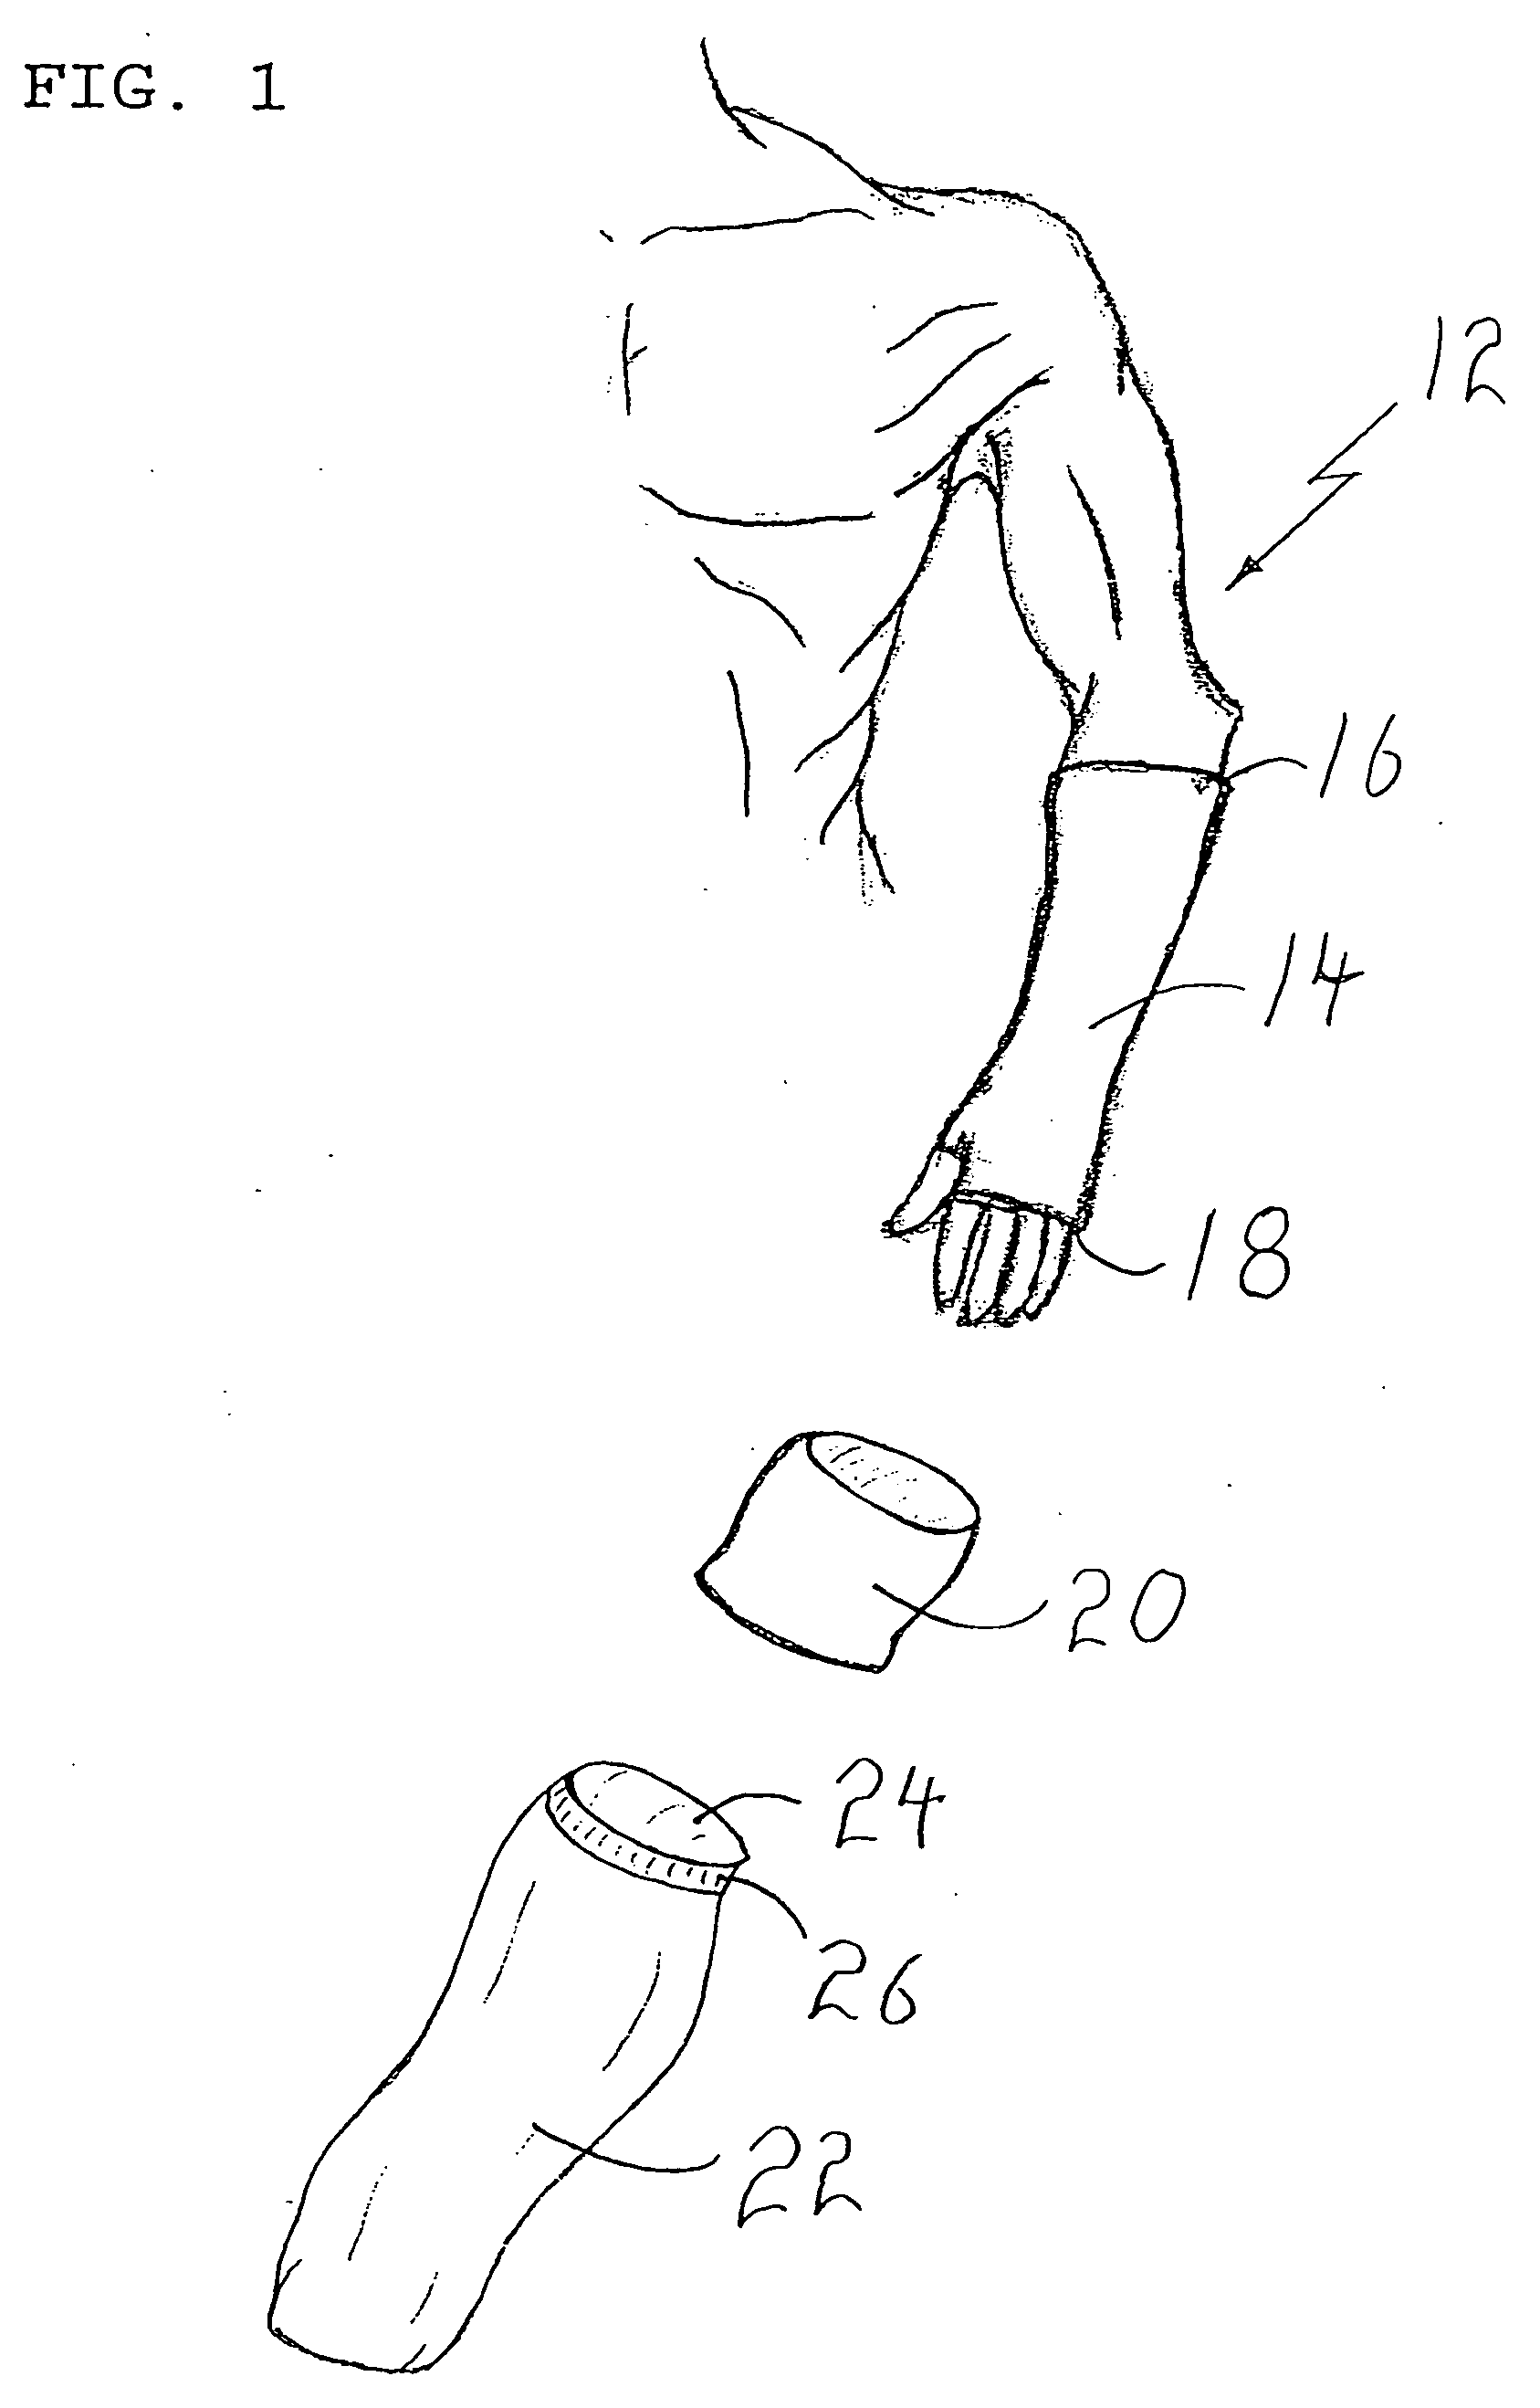 Method of sealing an opening on a waterproof covering for a limb